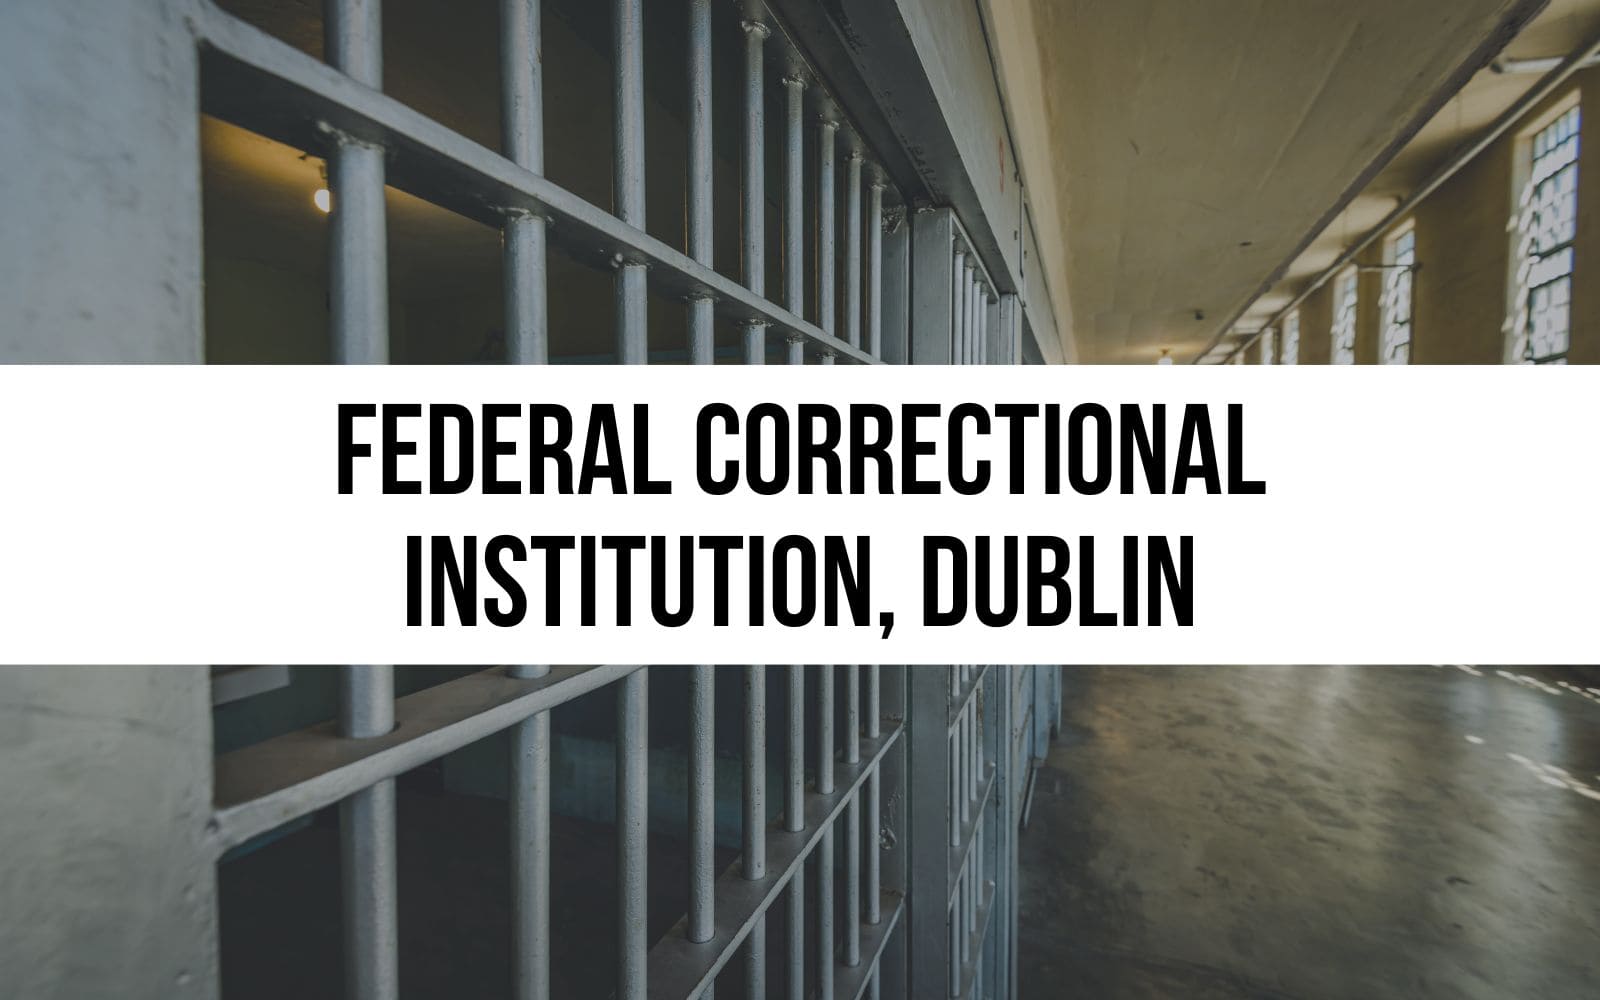 Federal Correctional Institution, Dublin